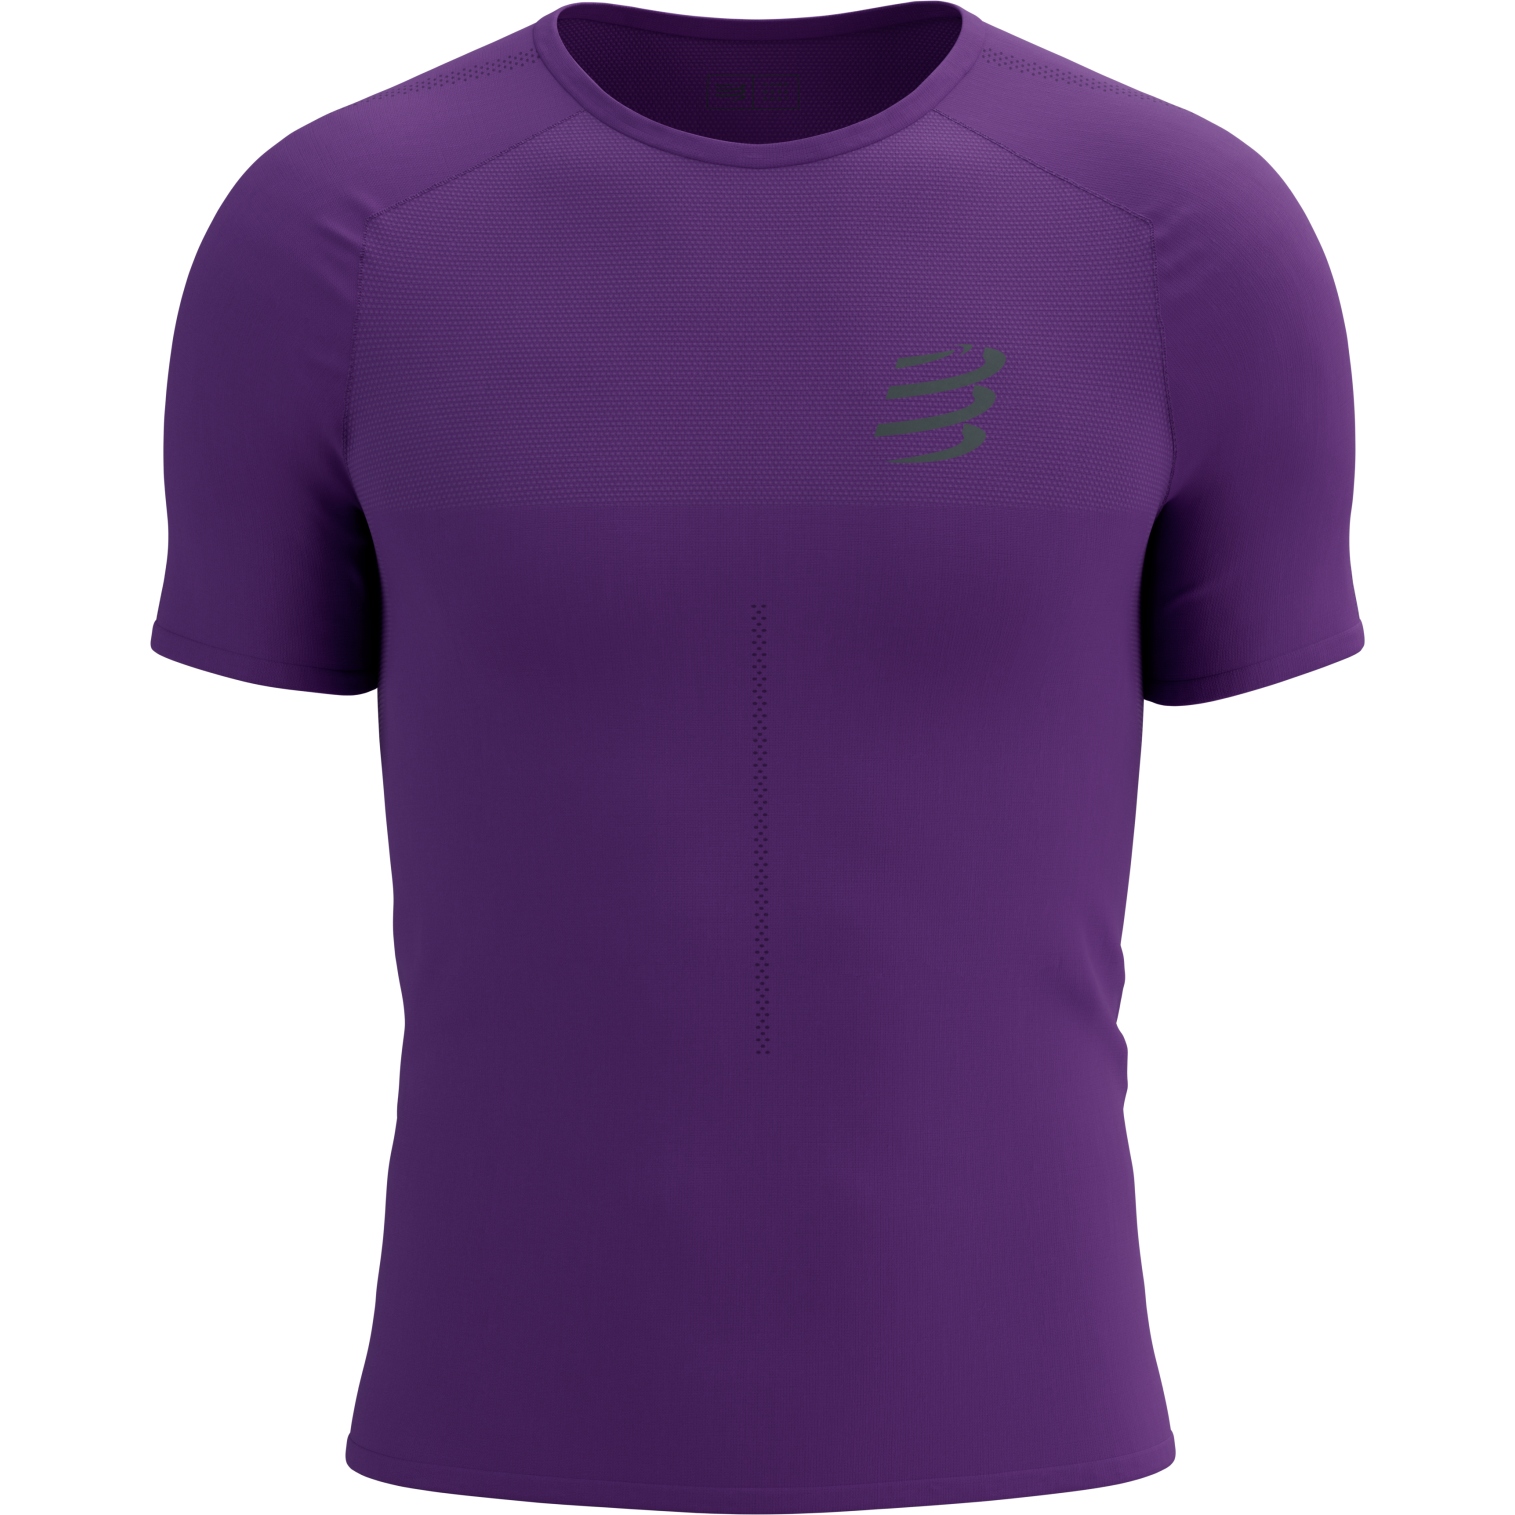 Picture of Compressport Performance T-Shirt Men - royal lilac/silver reflective